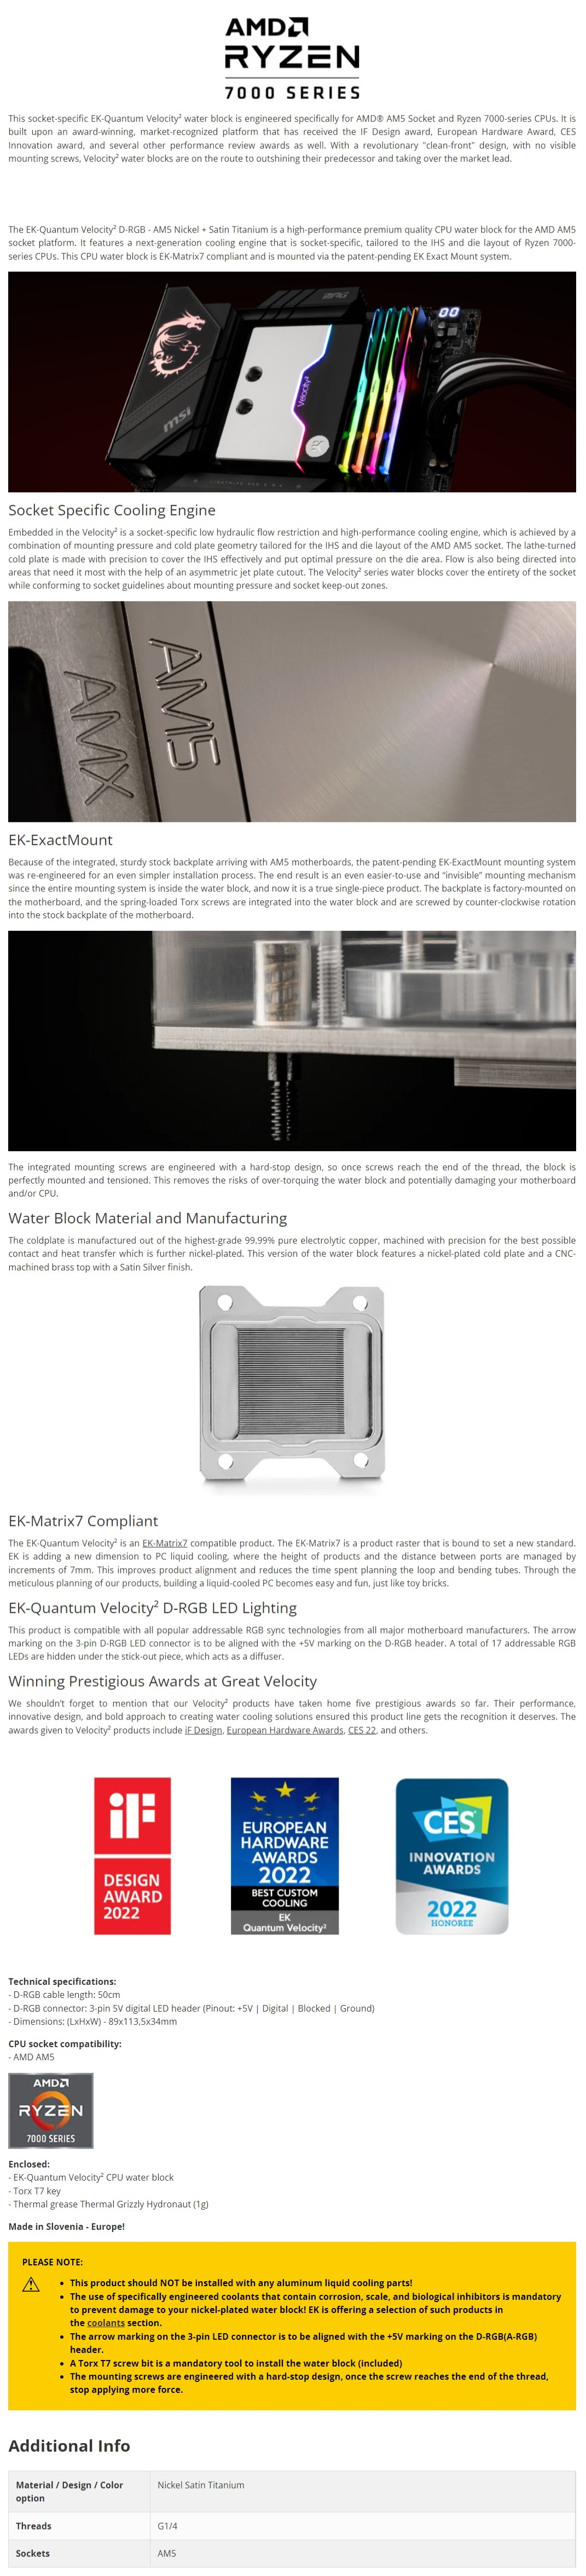 A large marketing image providing additional information about the product EK Quantum Velocity2 D-RGB AM5 CPU Waterblock - Nickel + Satin Titanium - Additional alt info not provided